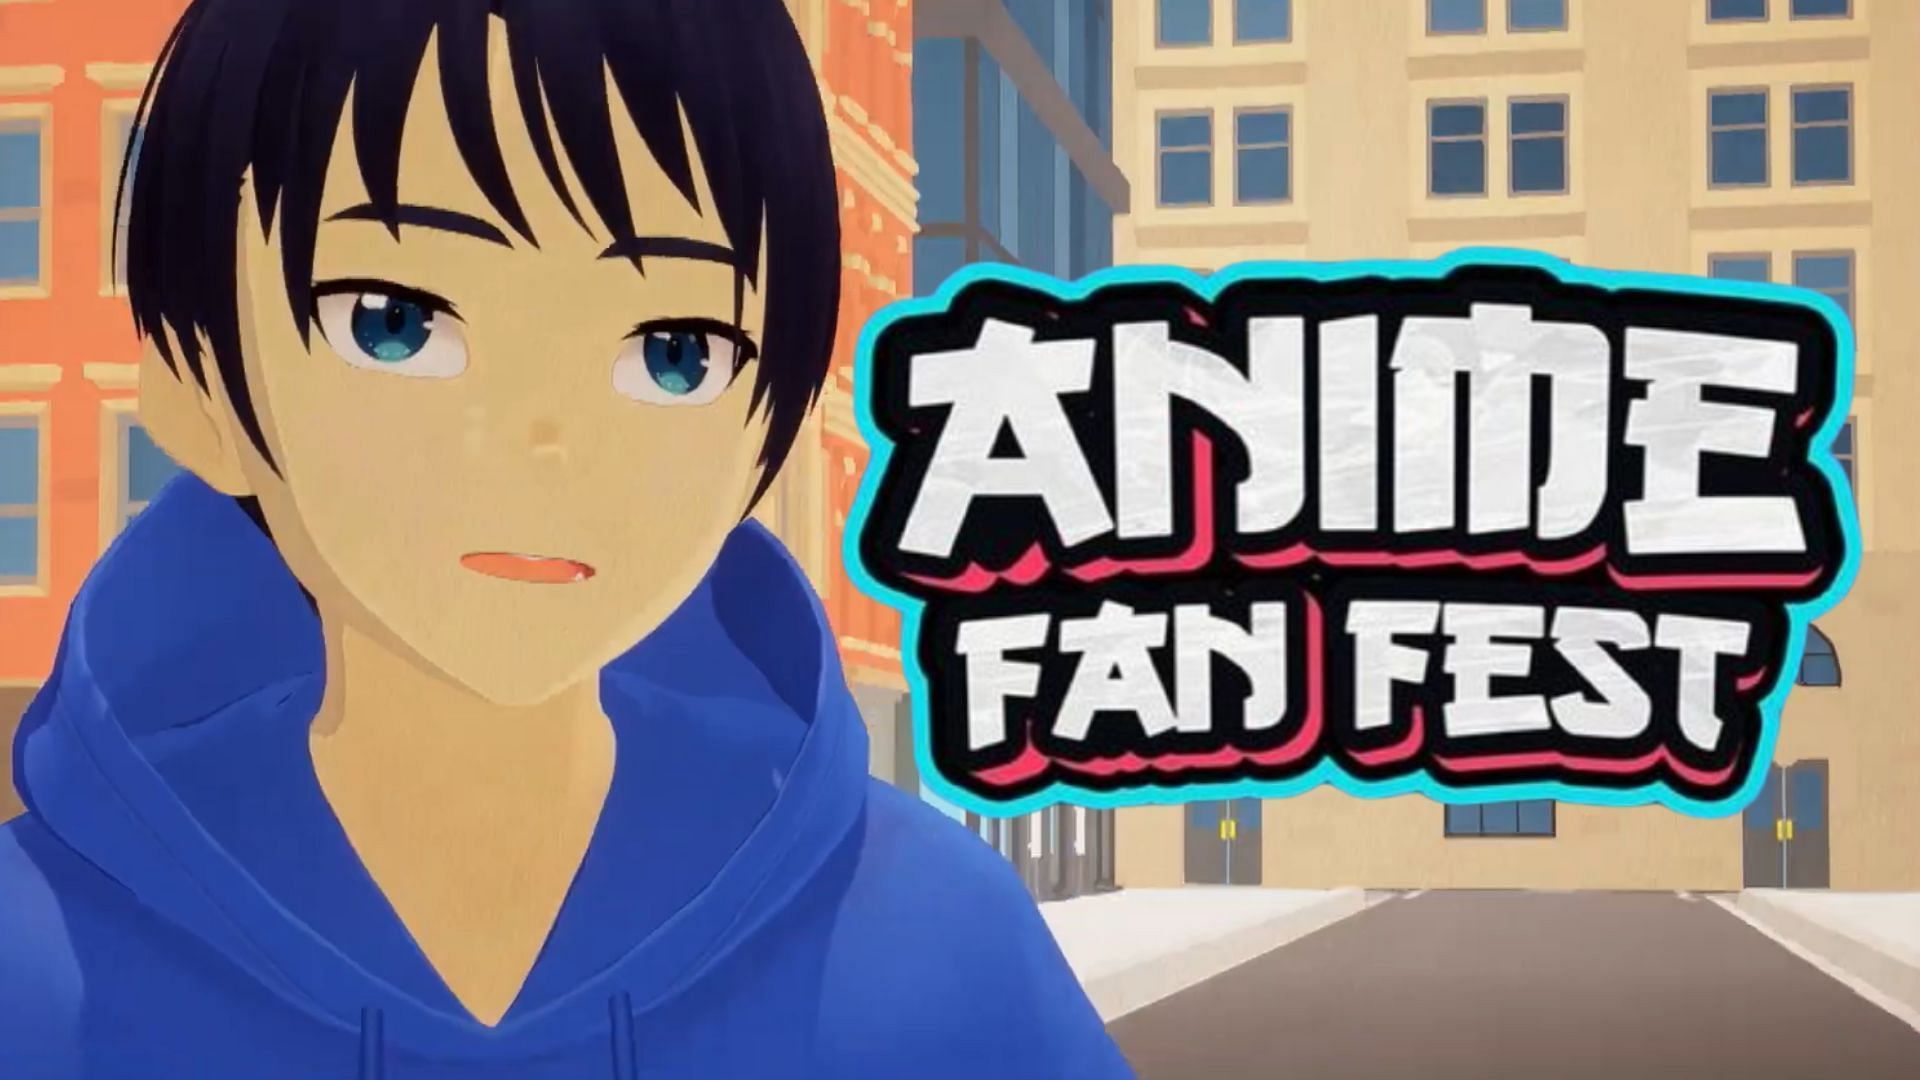 Zee Caf Anime Fan Fest India Debut Workshops Games Contests - Everything  Experiential